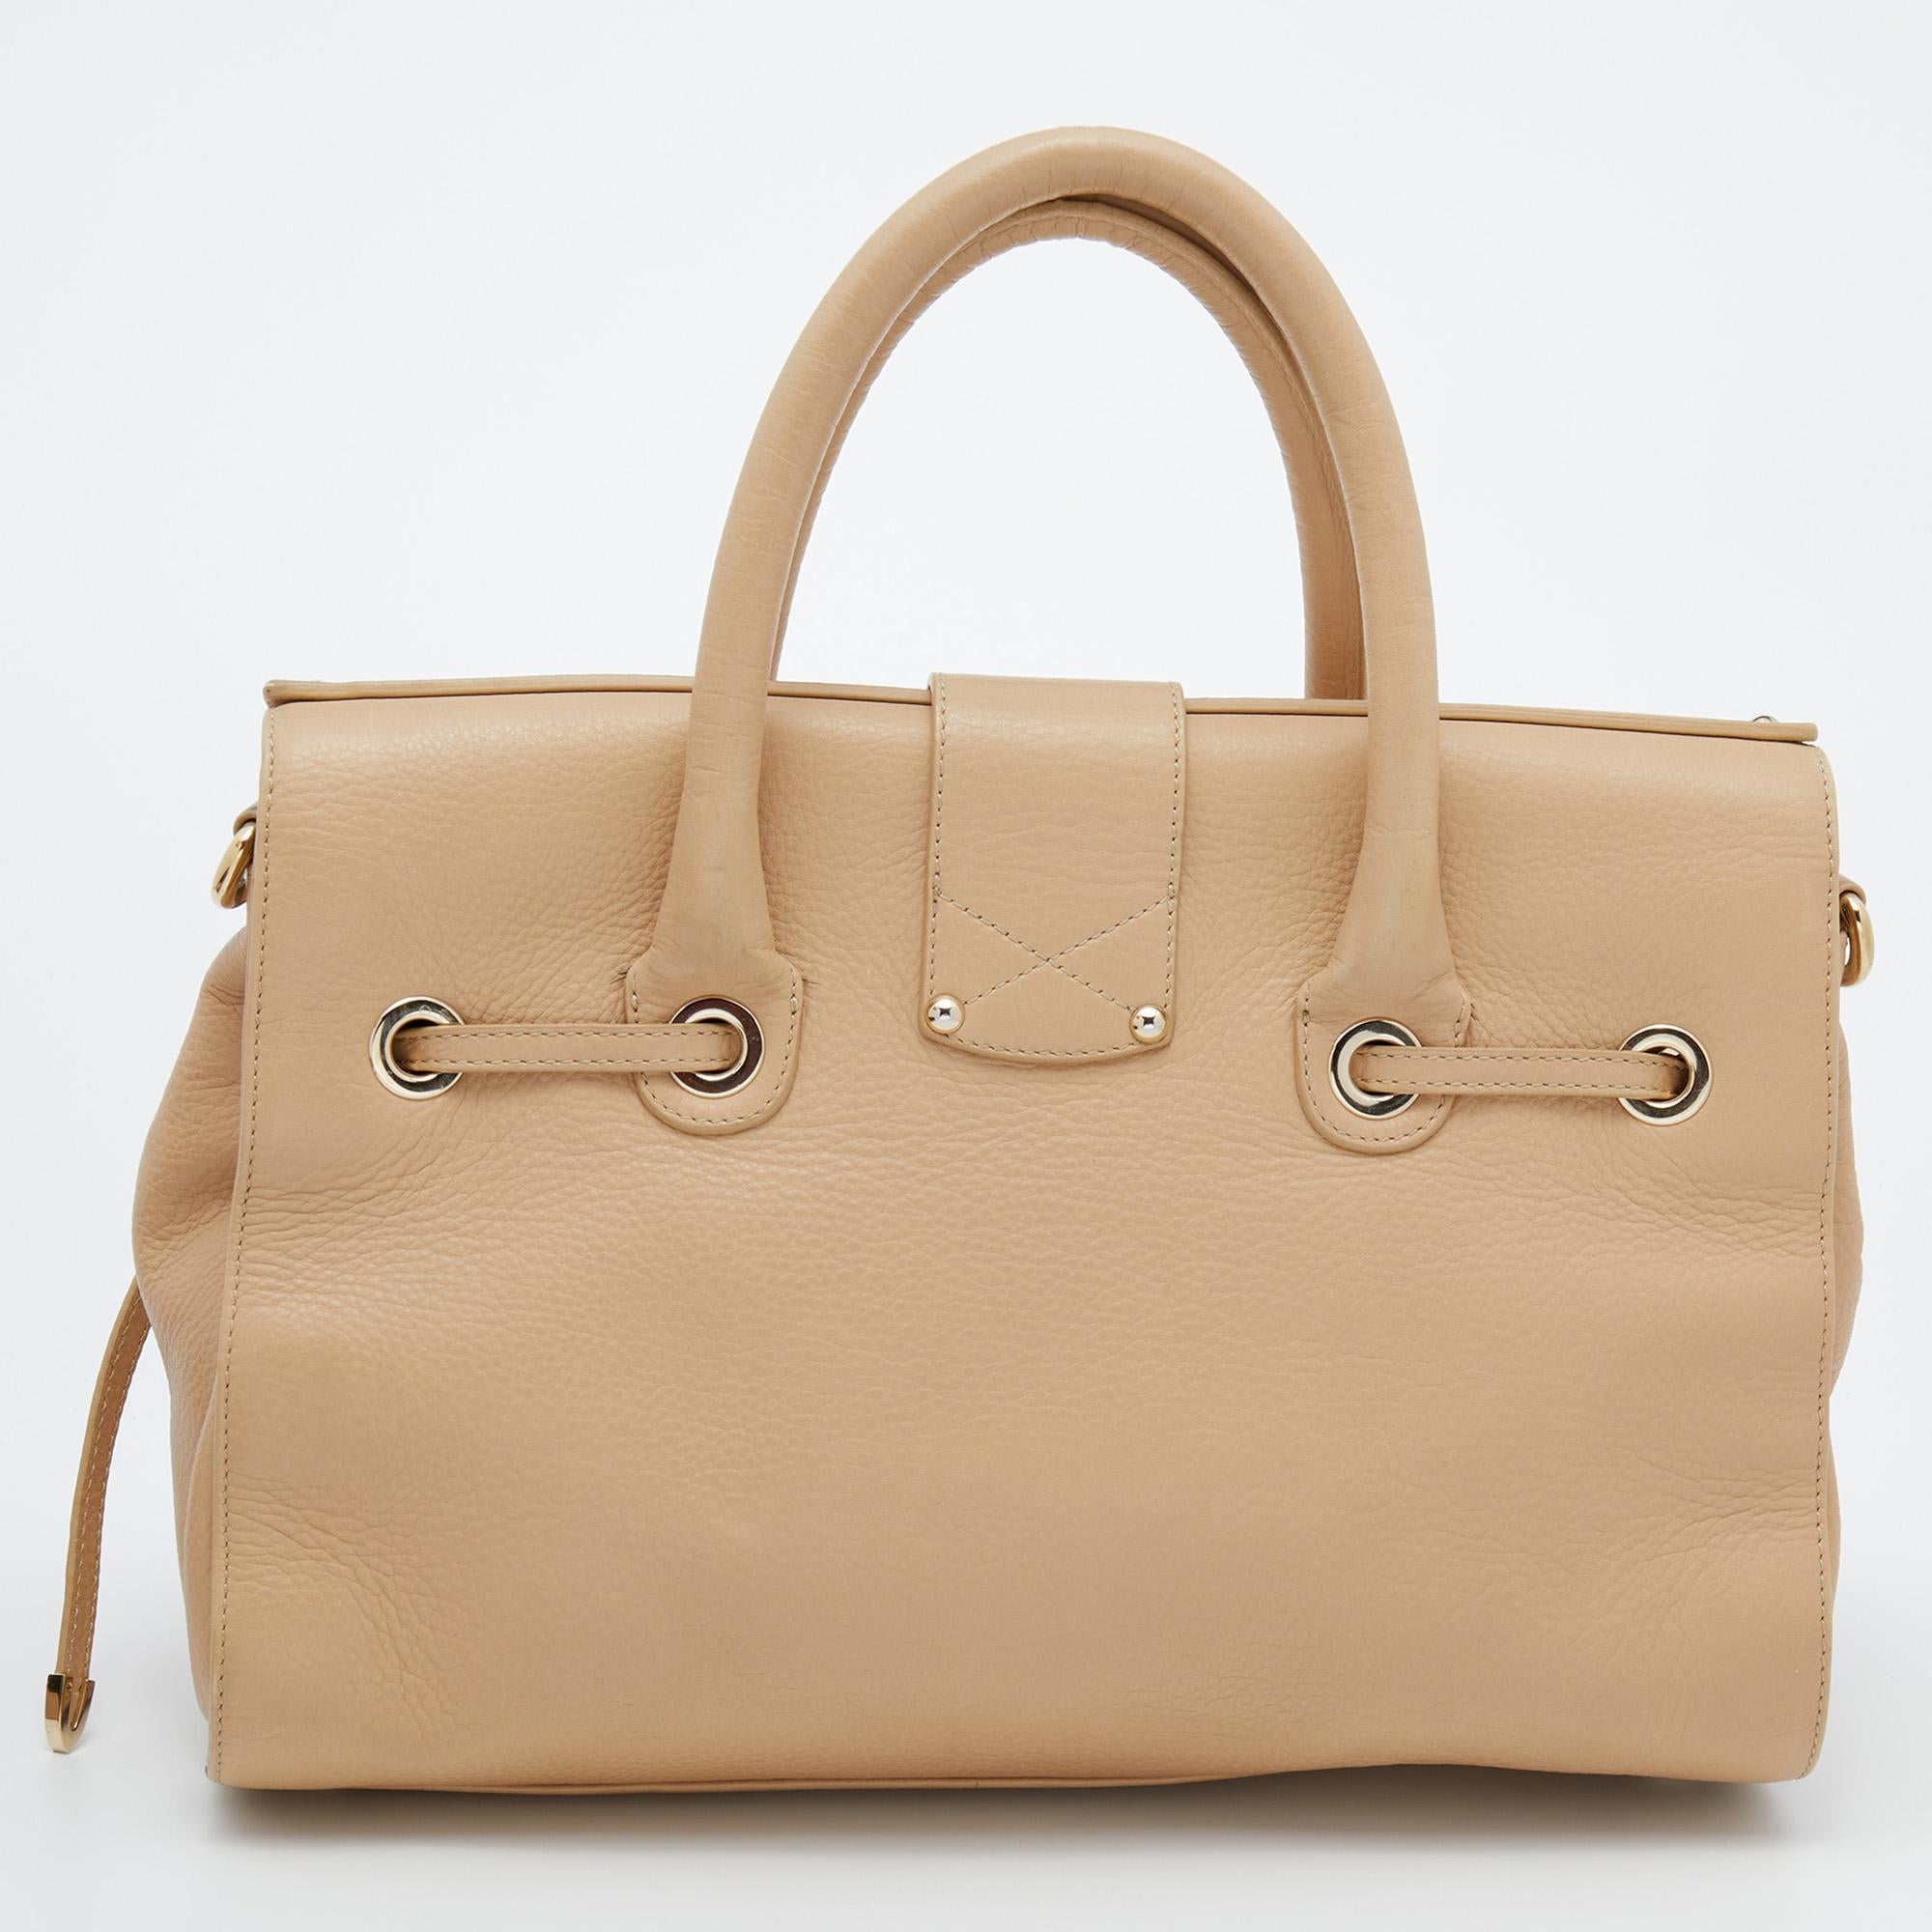 This Jimmy Choo Rosalie satchel is a practical handbag with an elegant touch. Crafted from leather, it is accented with a logo-engraved closure in gold tone. It features a drawstring-like design, double handles, a removable shoulder strap, and